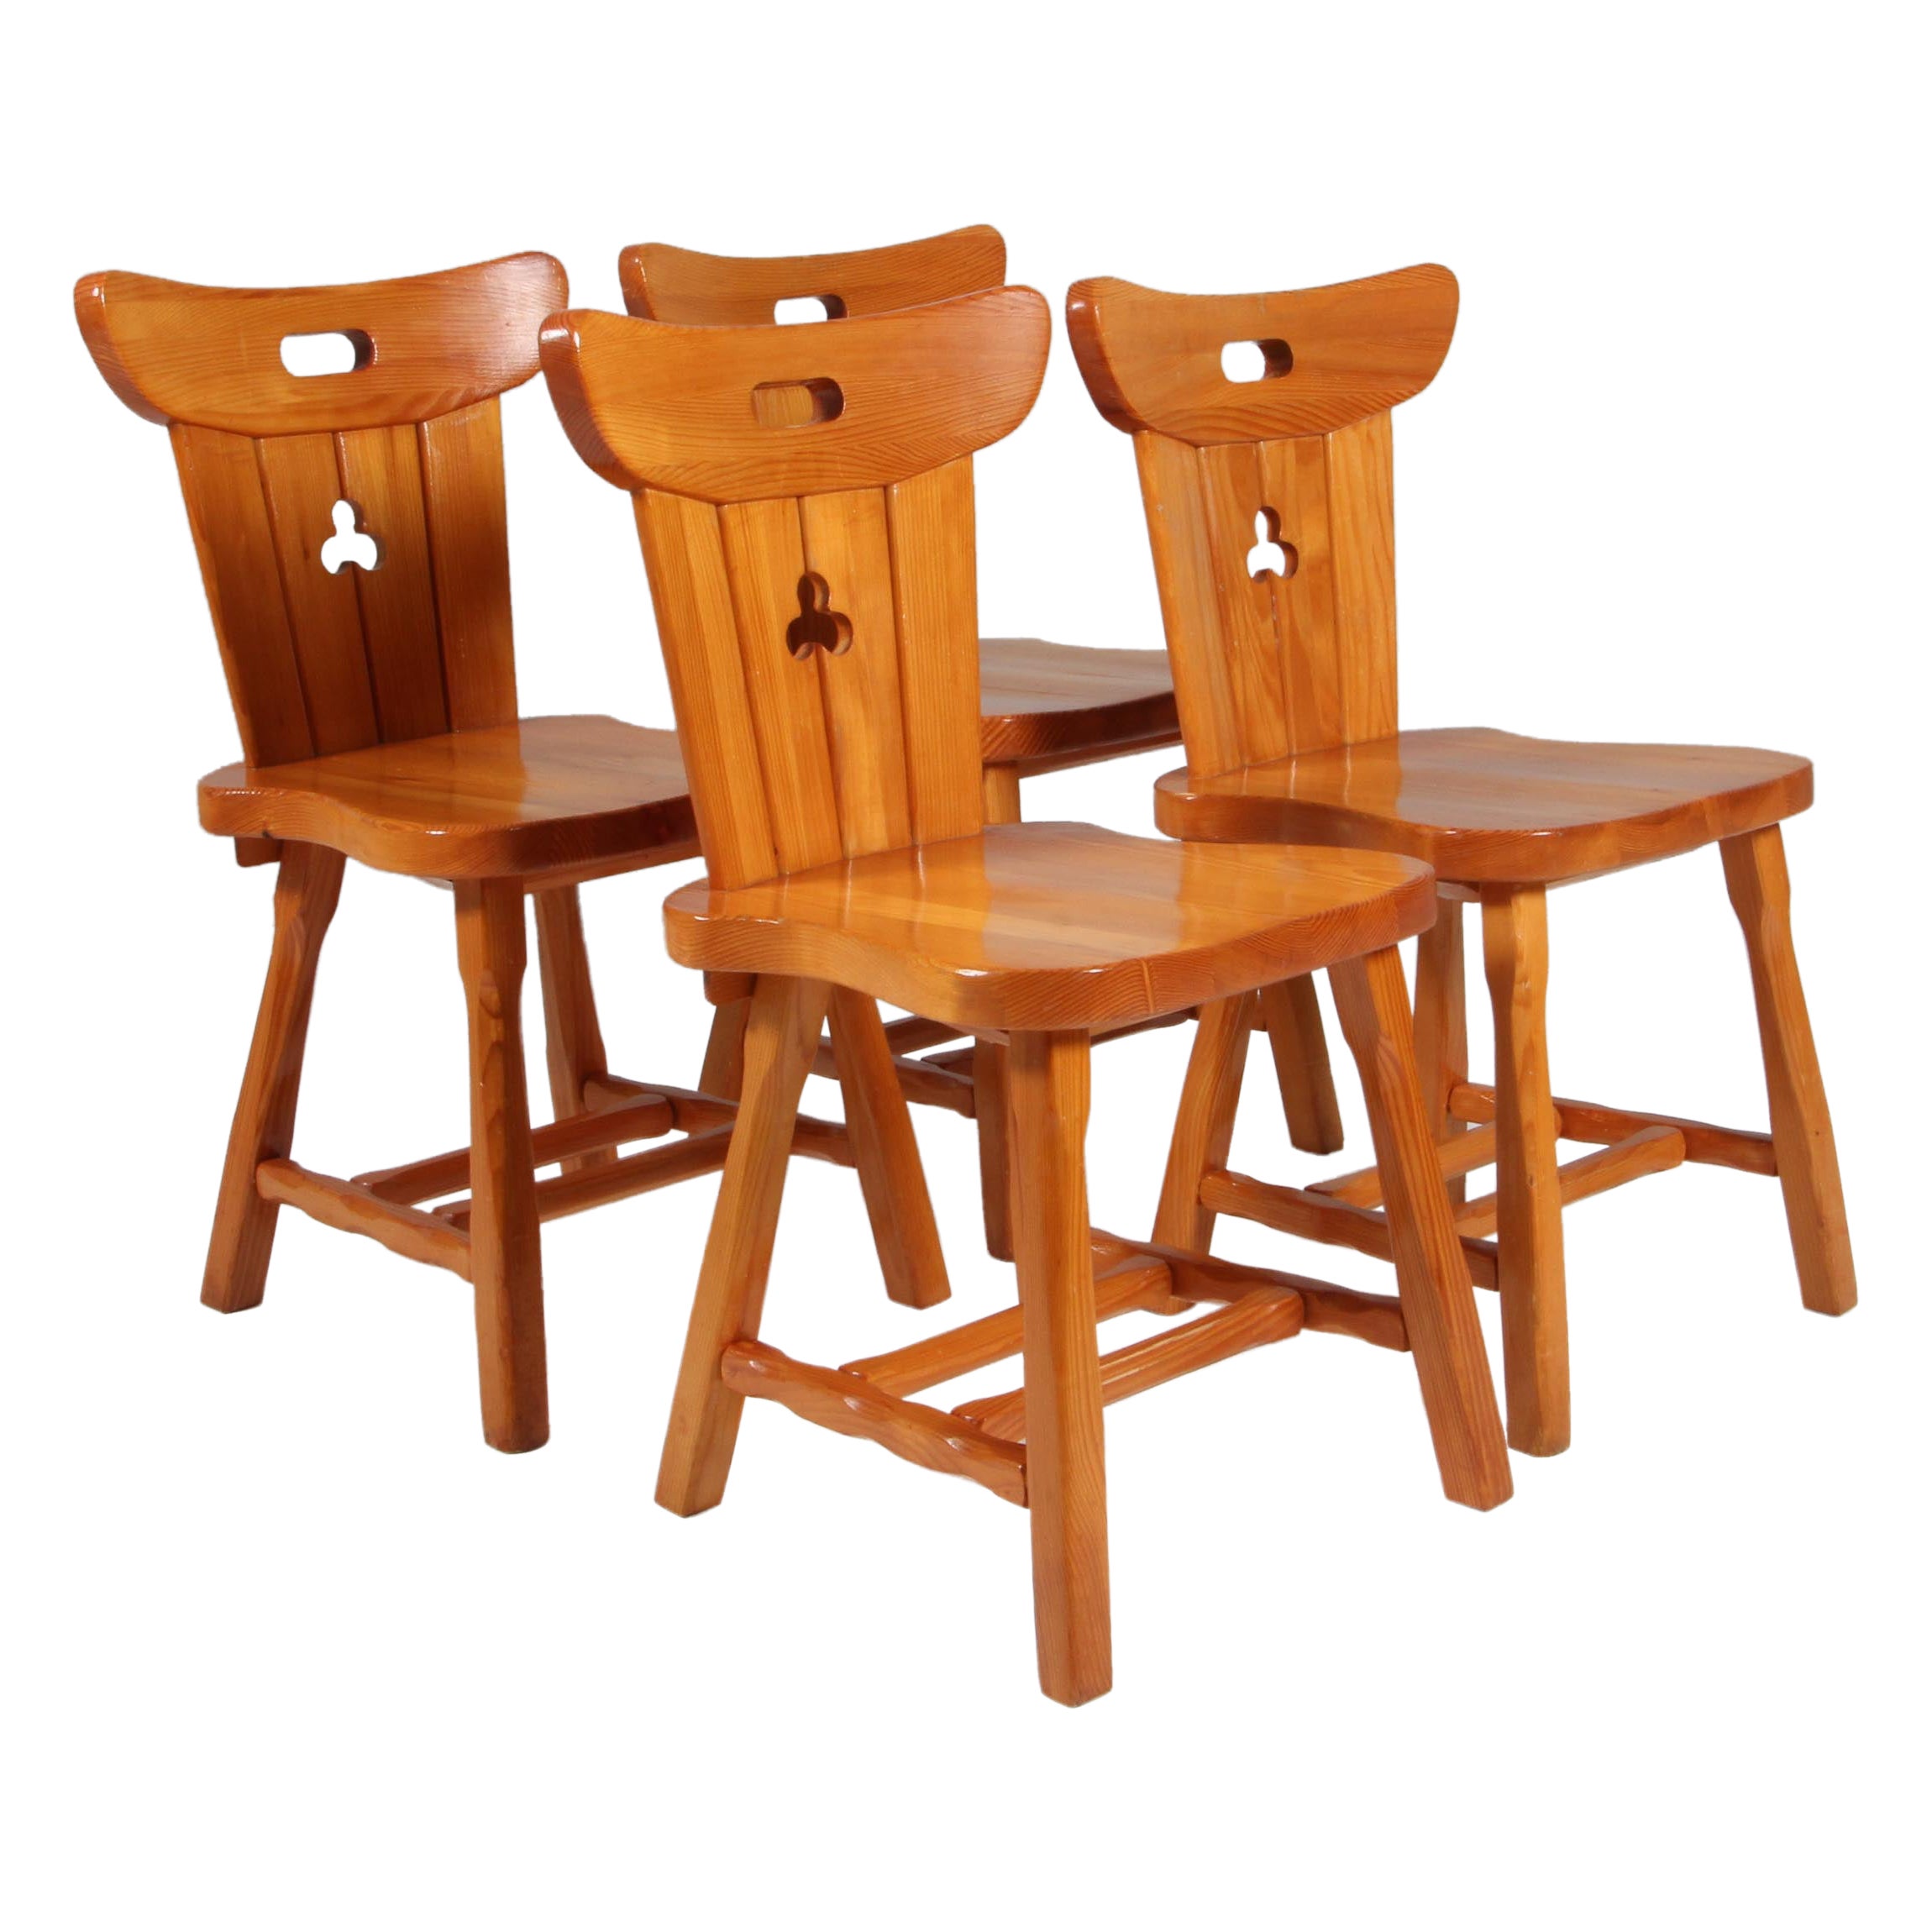 Swedish Cabin Chairs from the 1970s in Solid Pine Wood